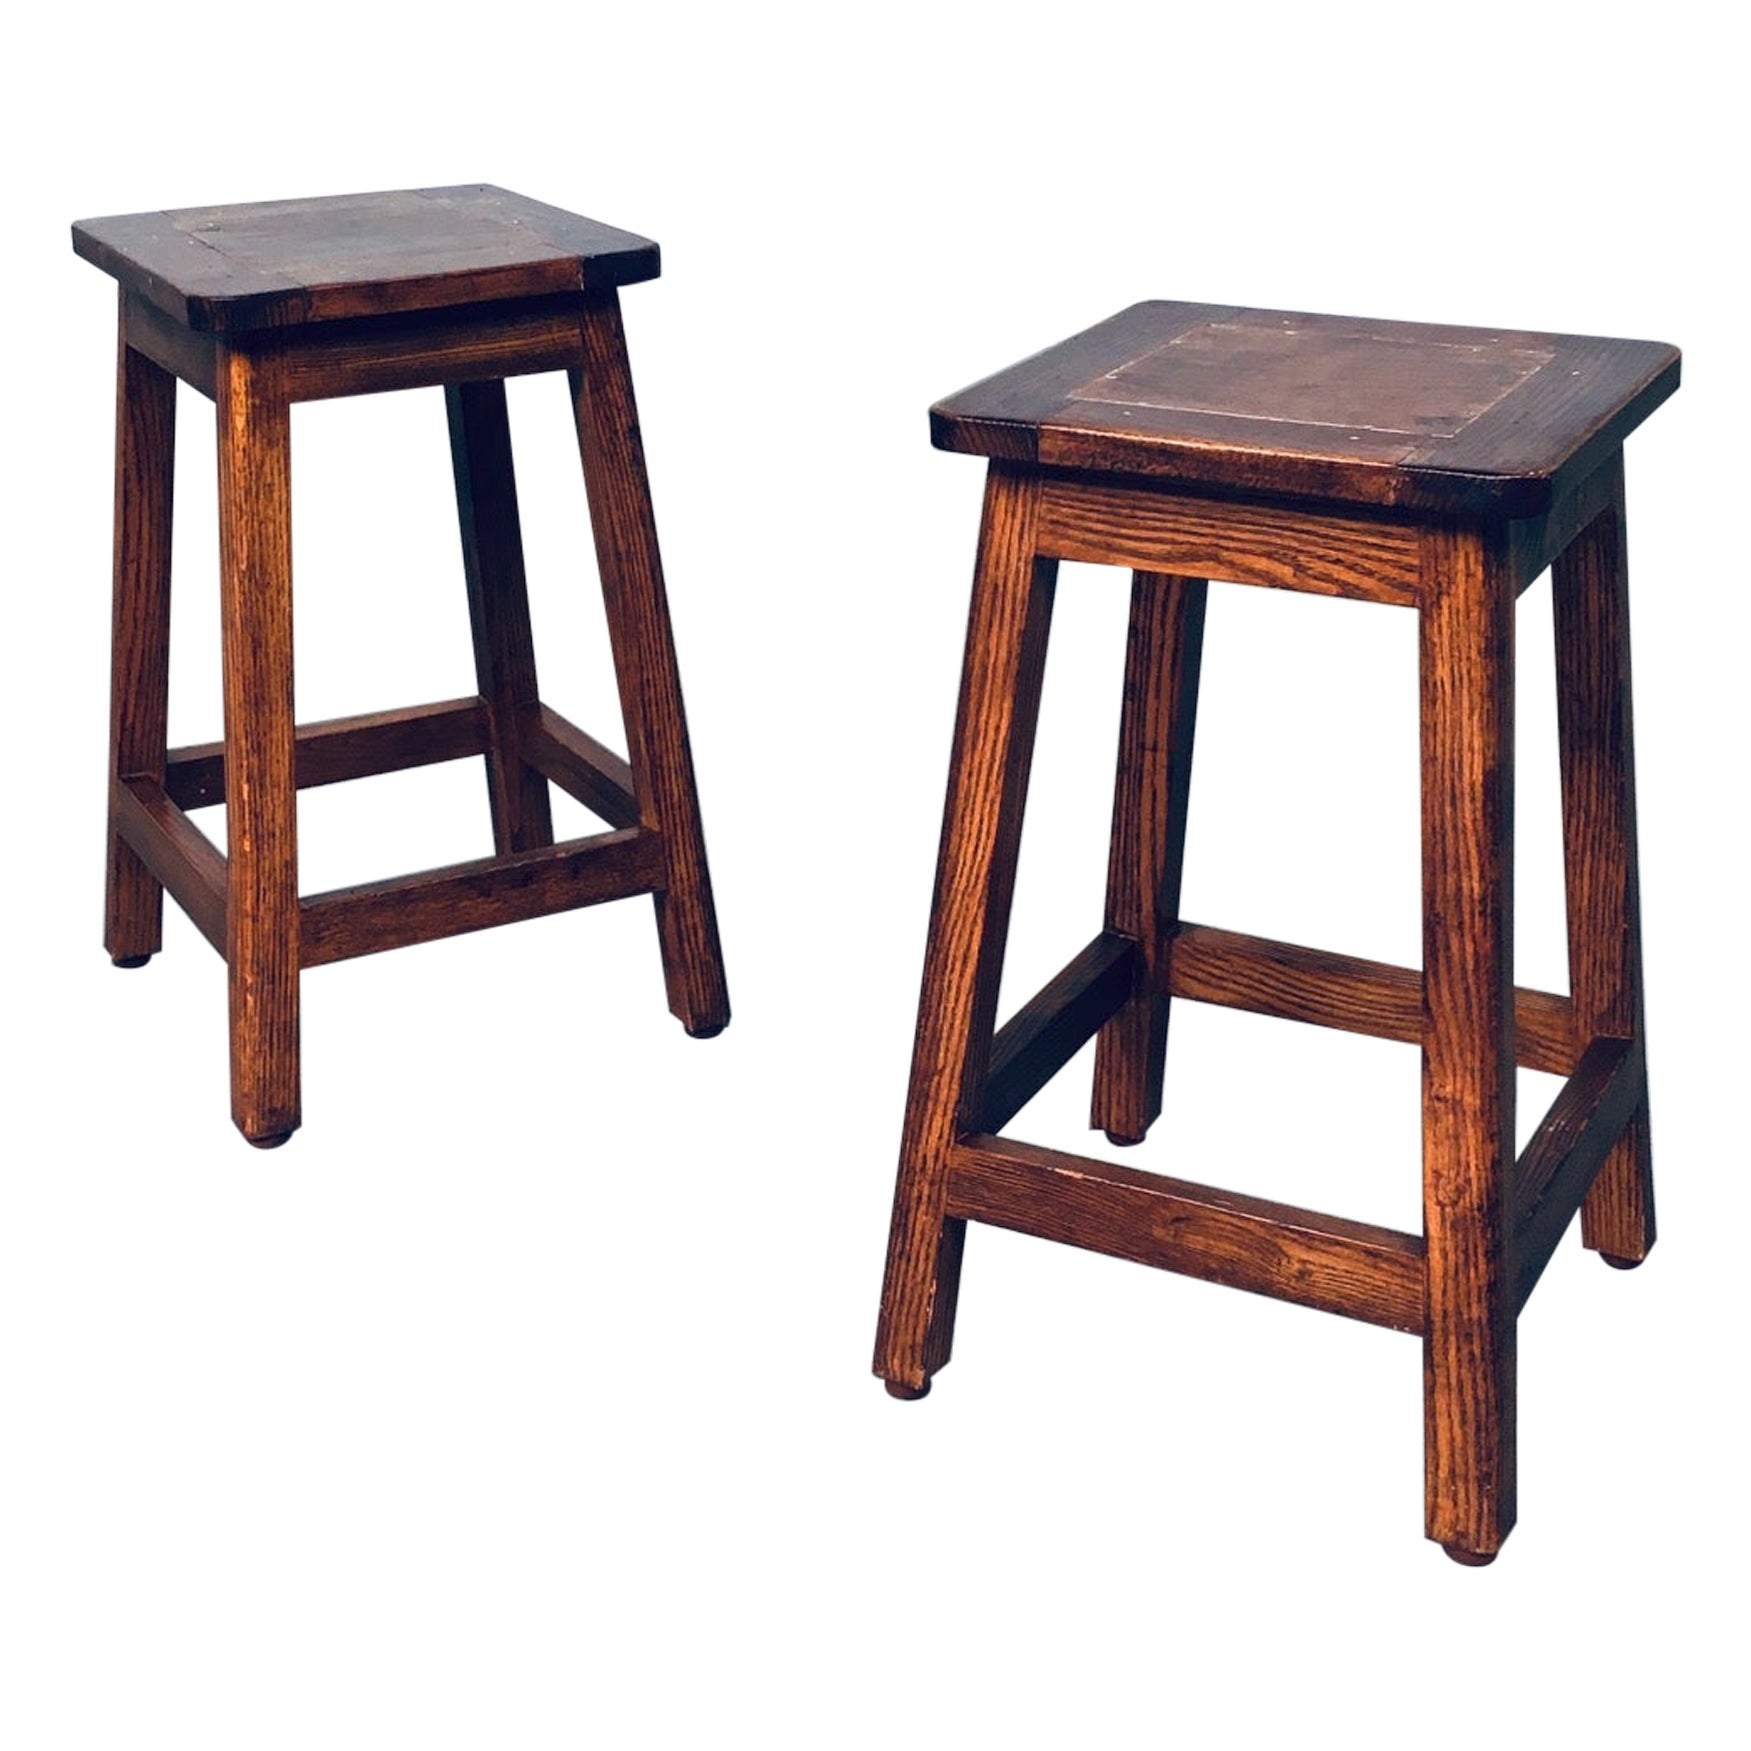 Pair of Vintage 1950's Square Potters Stools